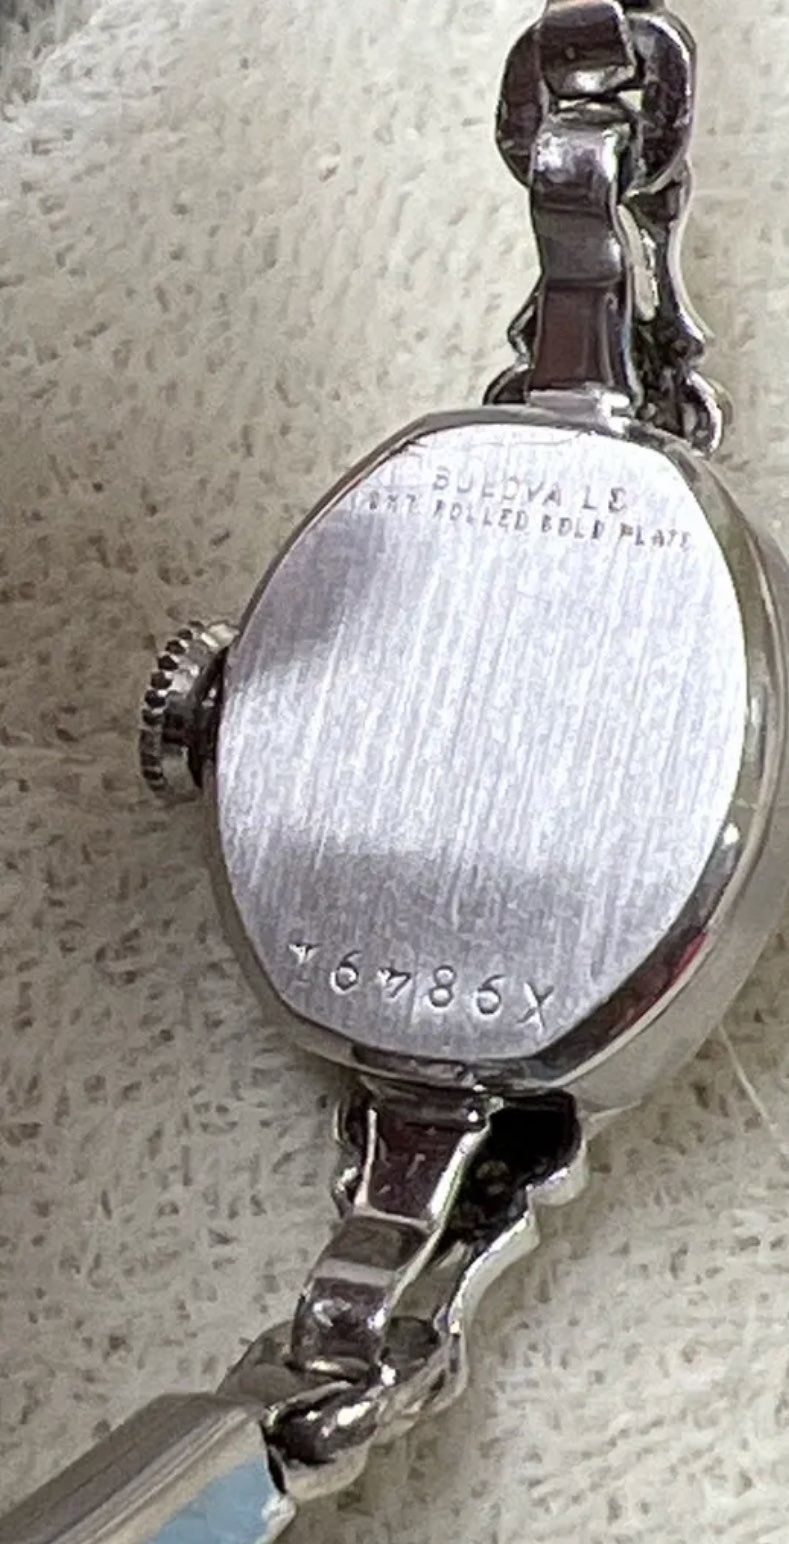 Back of watch with engravings and case  number